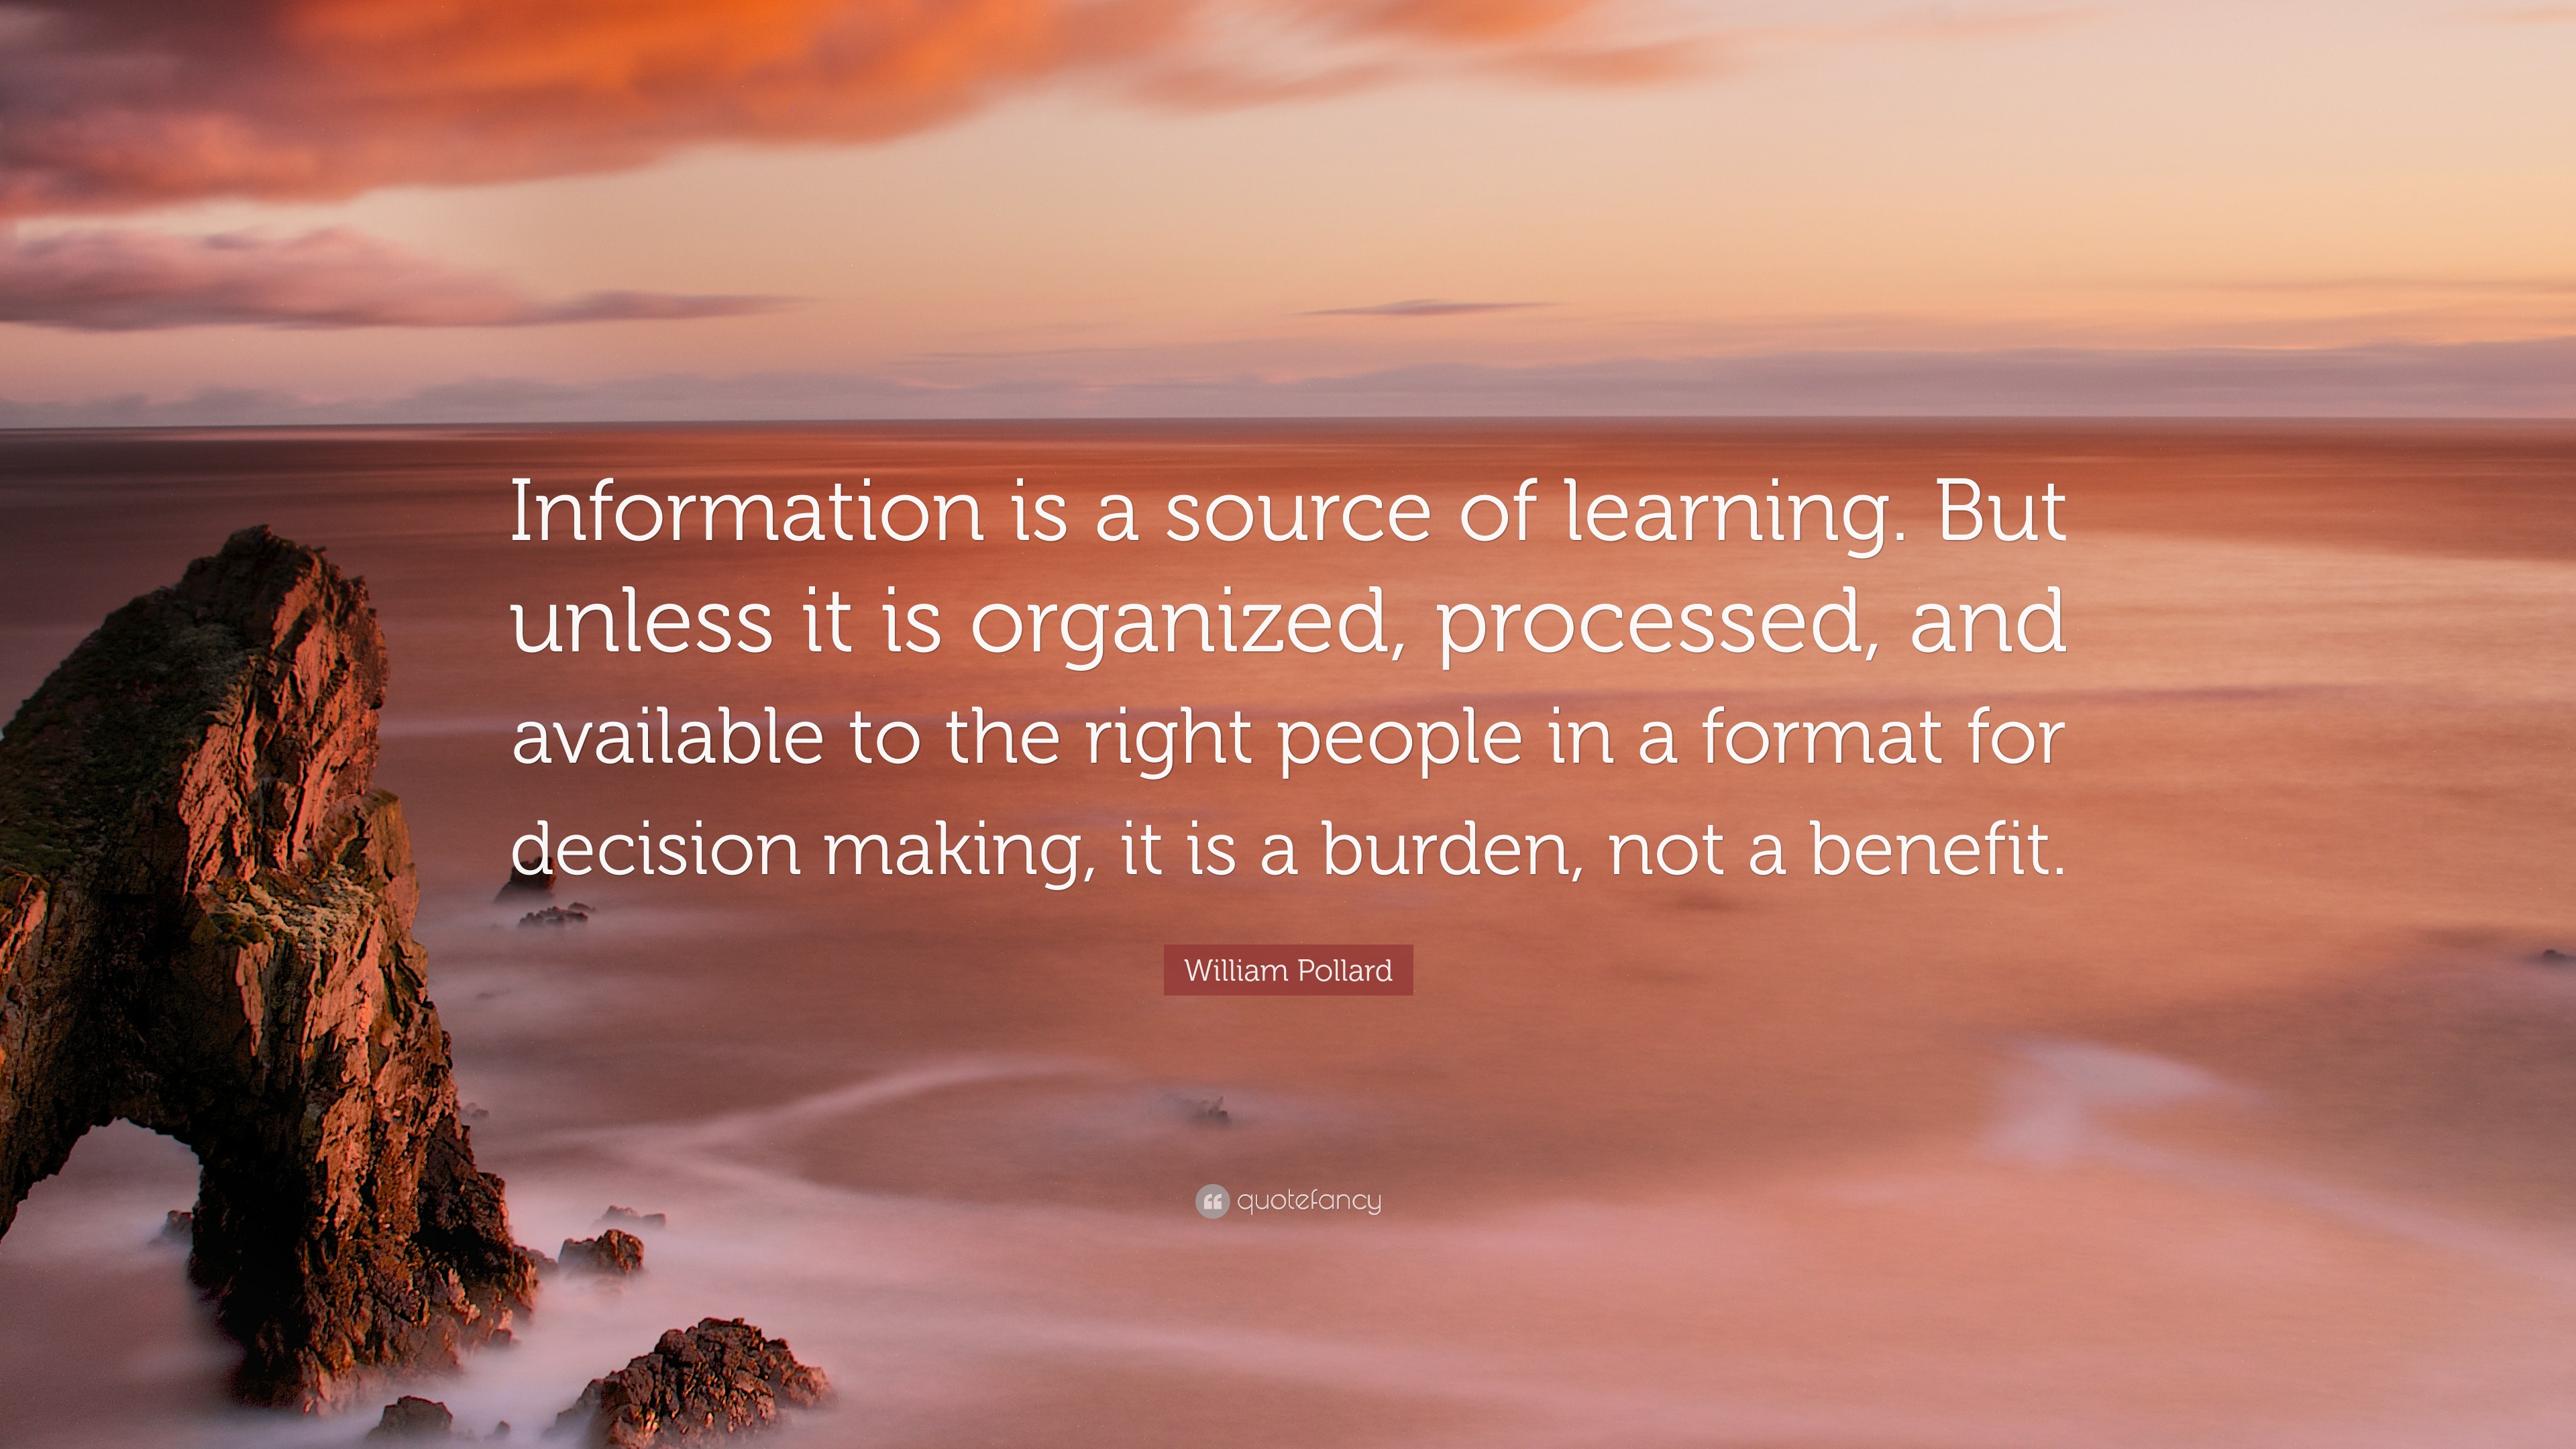 William Pollard Quote: “Information is a source of learning. But unless